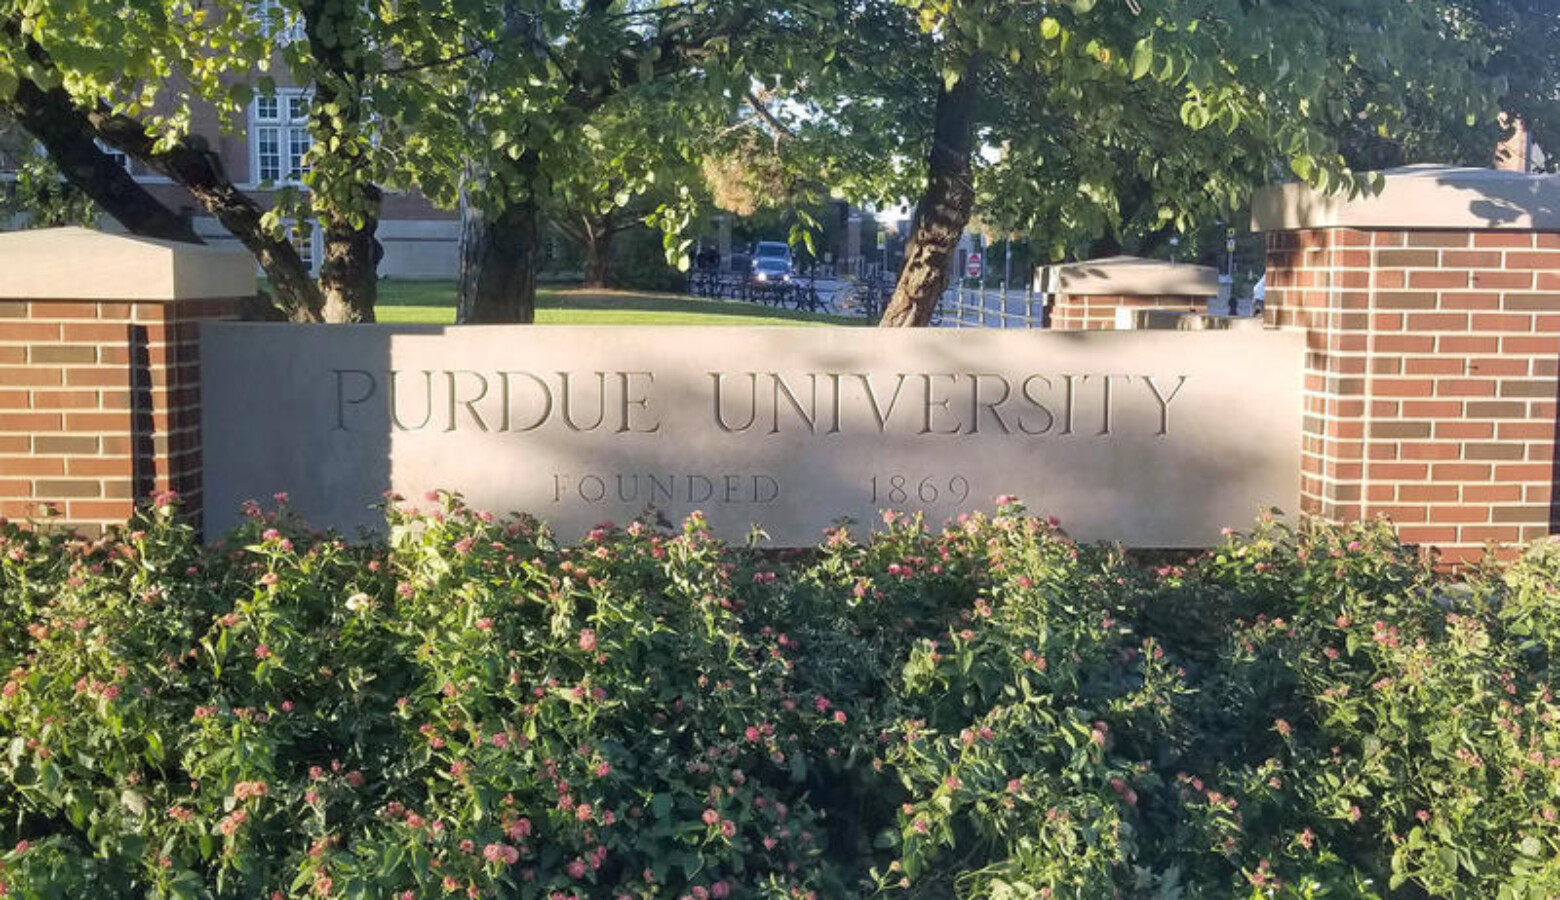 Purdue University announced on Twitter it would support the federal lawsuit challenging the new ICE policy. (Samantha Horton/IPB News)